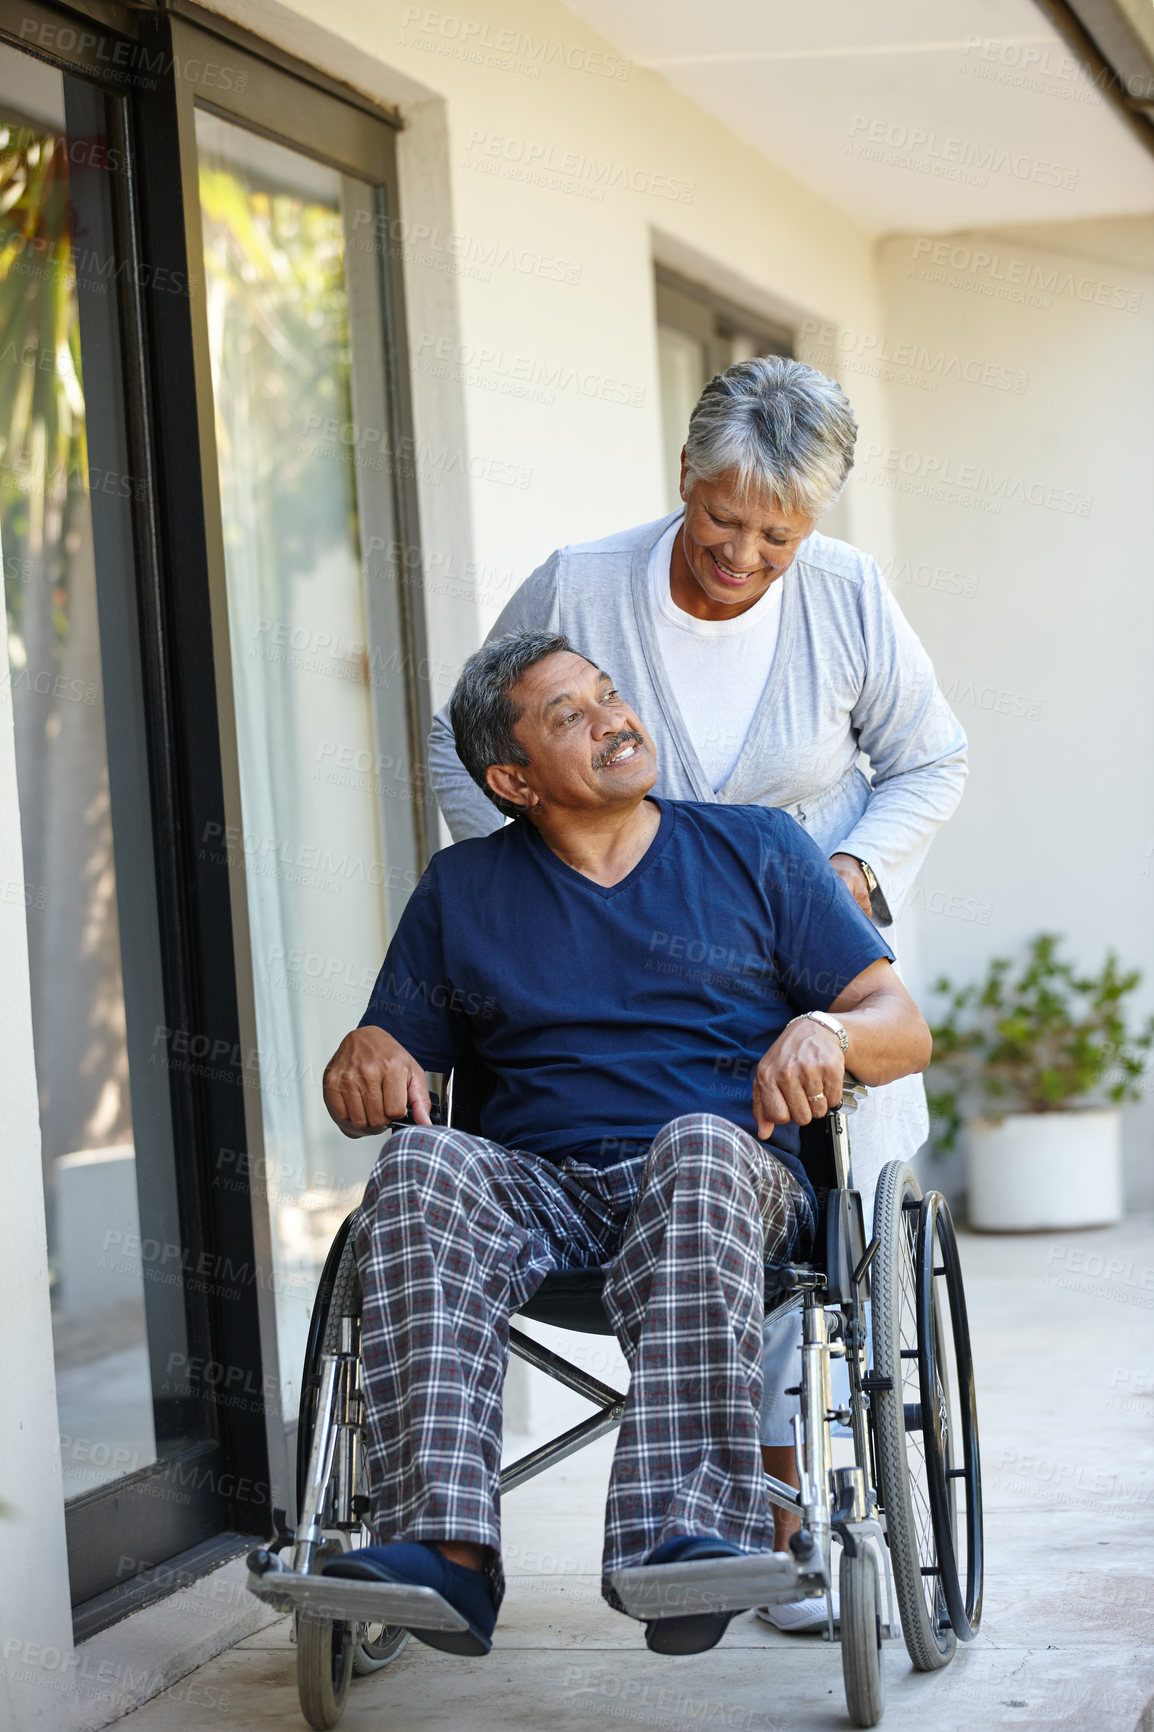 Buy stock photo Shot of a senior woman pushing her husband in a wheelchair outdoors